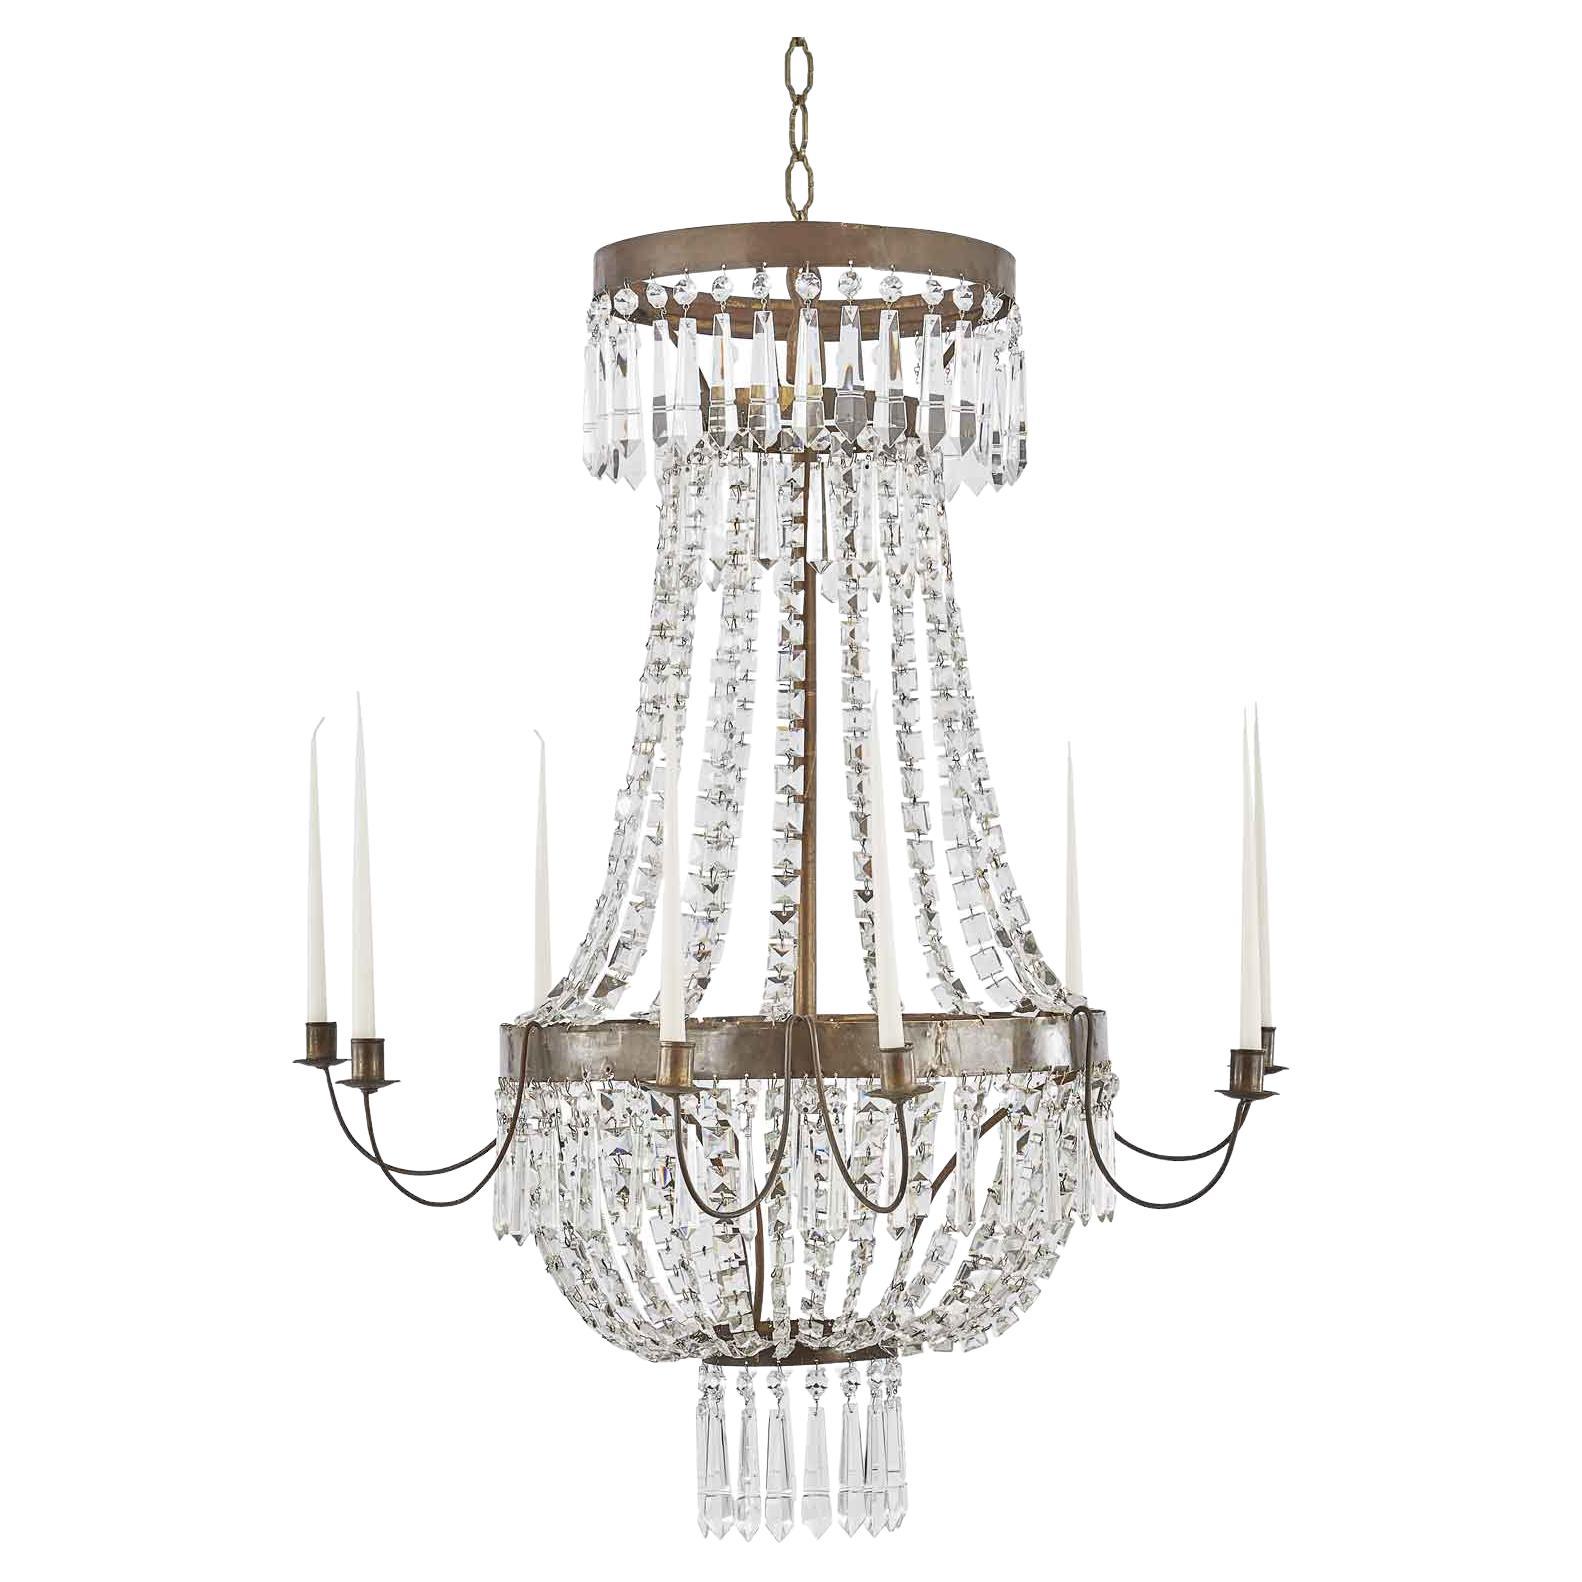 19th Century Italian Empire Crystal Candle Chandelier